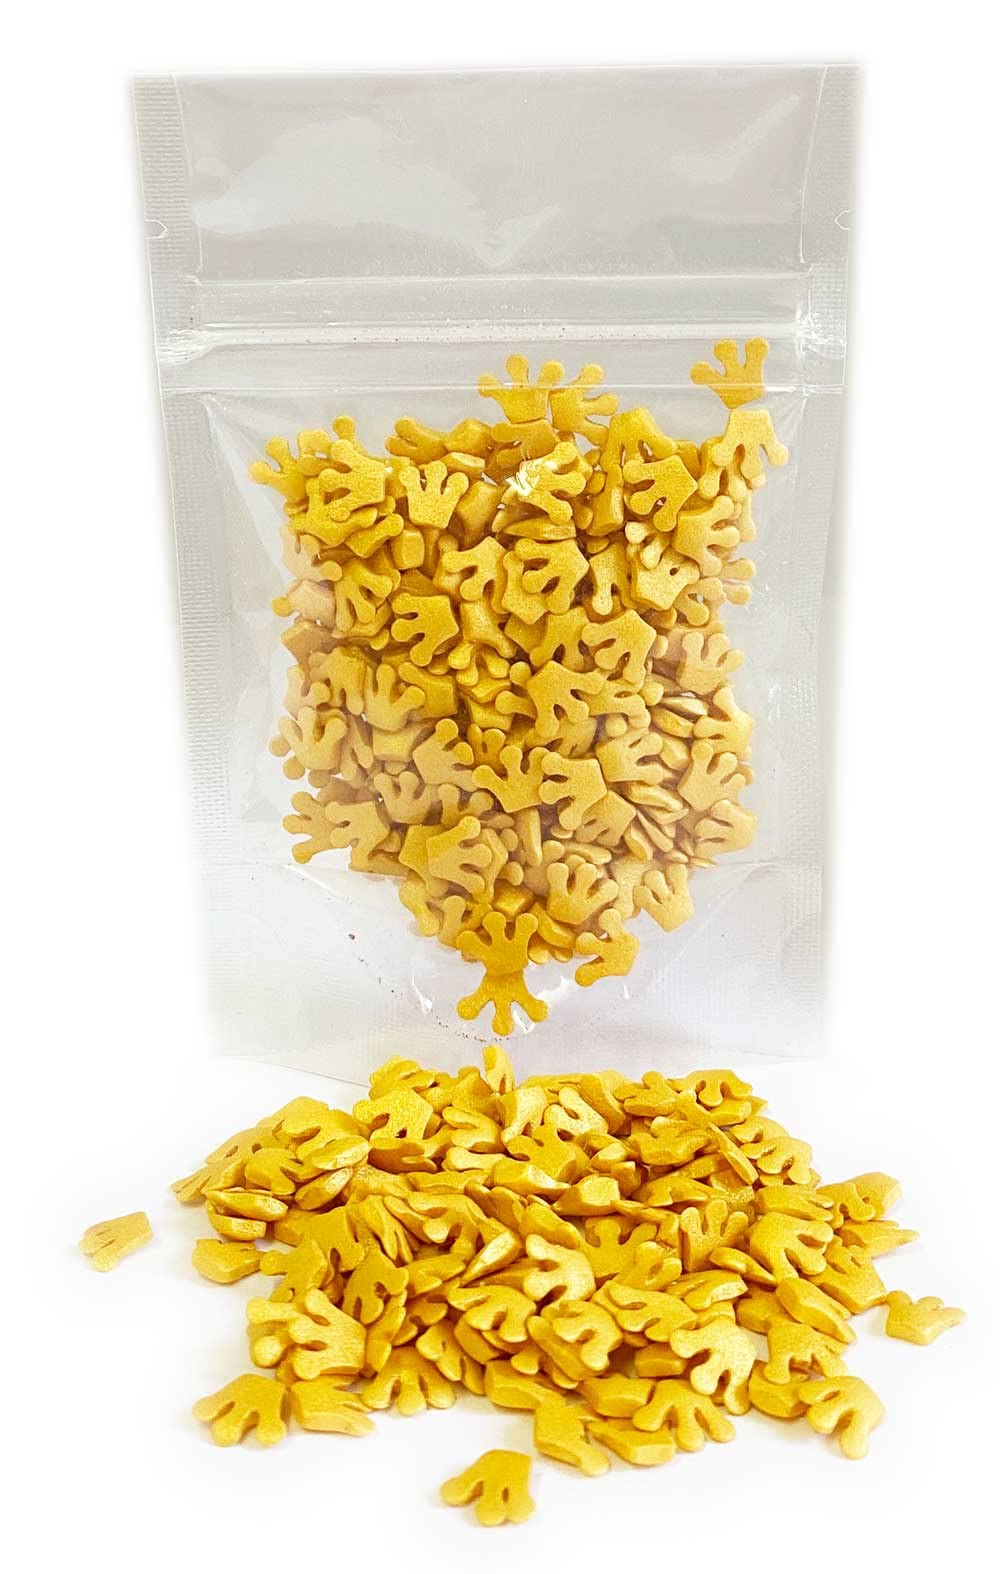 A Pinch Of... – Glimmer Gold Crown Shapes - 25g. Beautiful crowns, ideal for your Royal celebrations & princess themed cakes & bakes. Just enough for a single bake. (Gold Crowns)